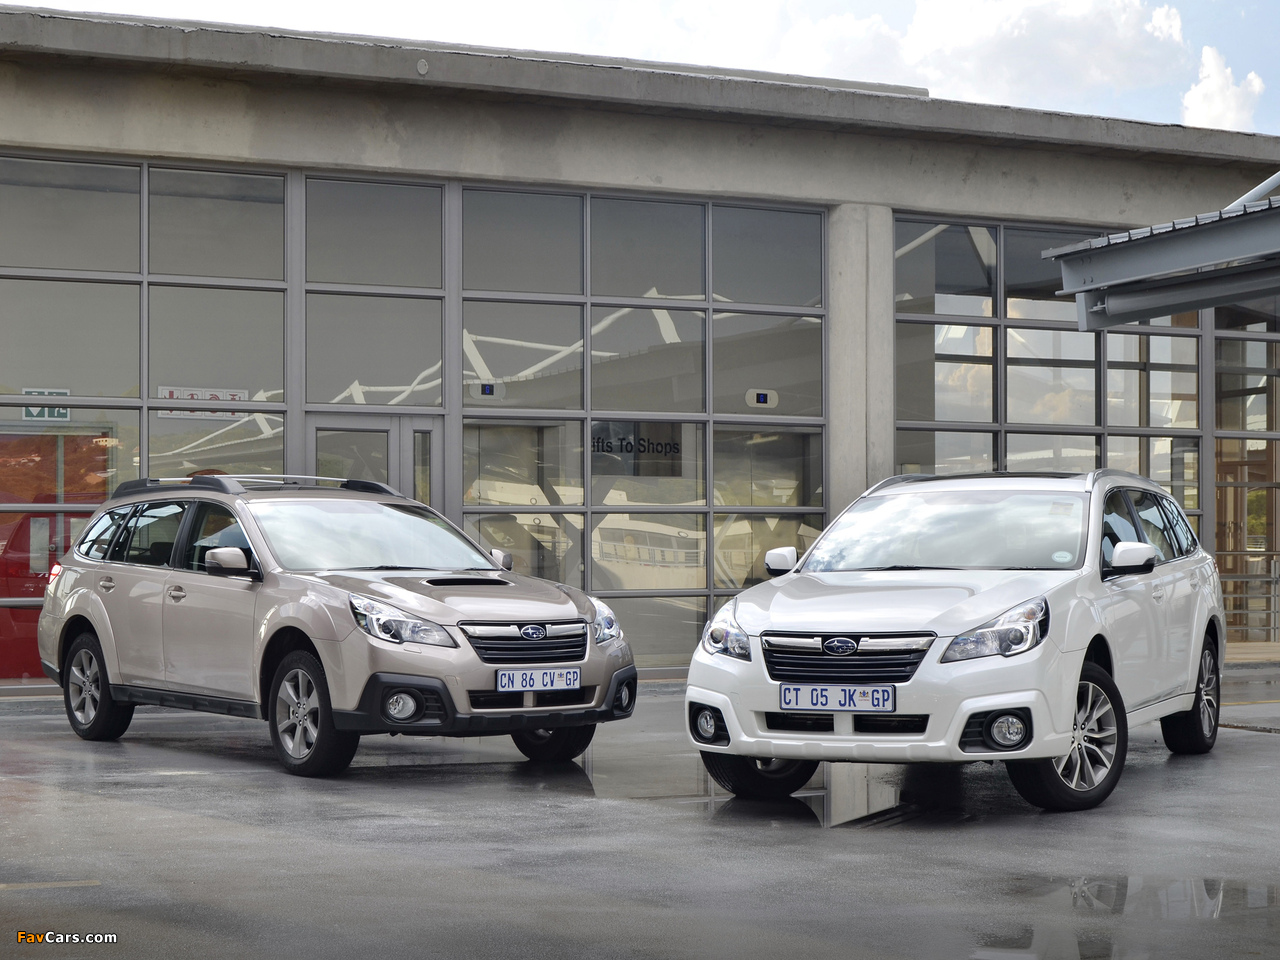 Images of Subaru Outback (1280 x 960)